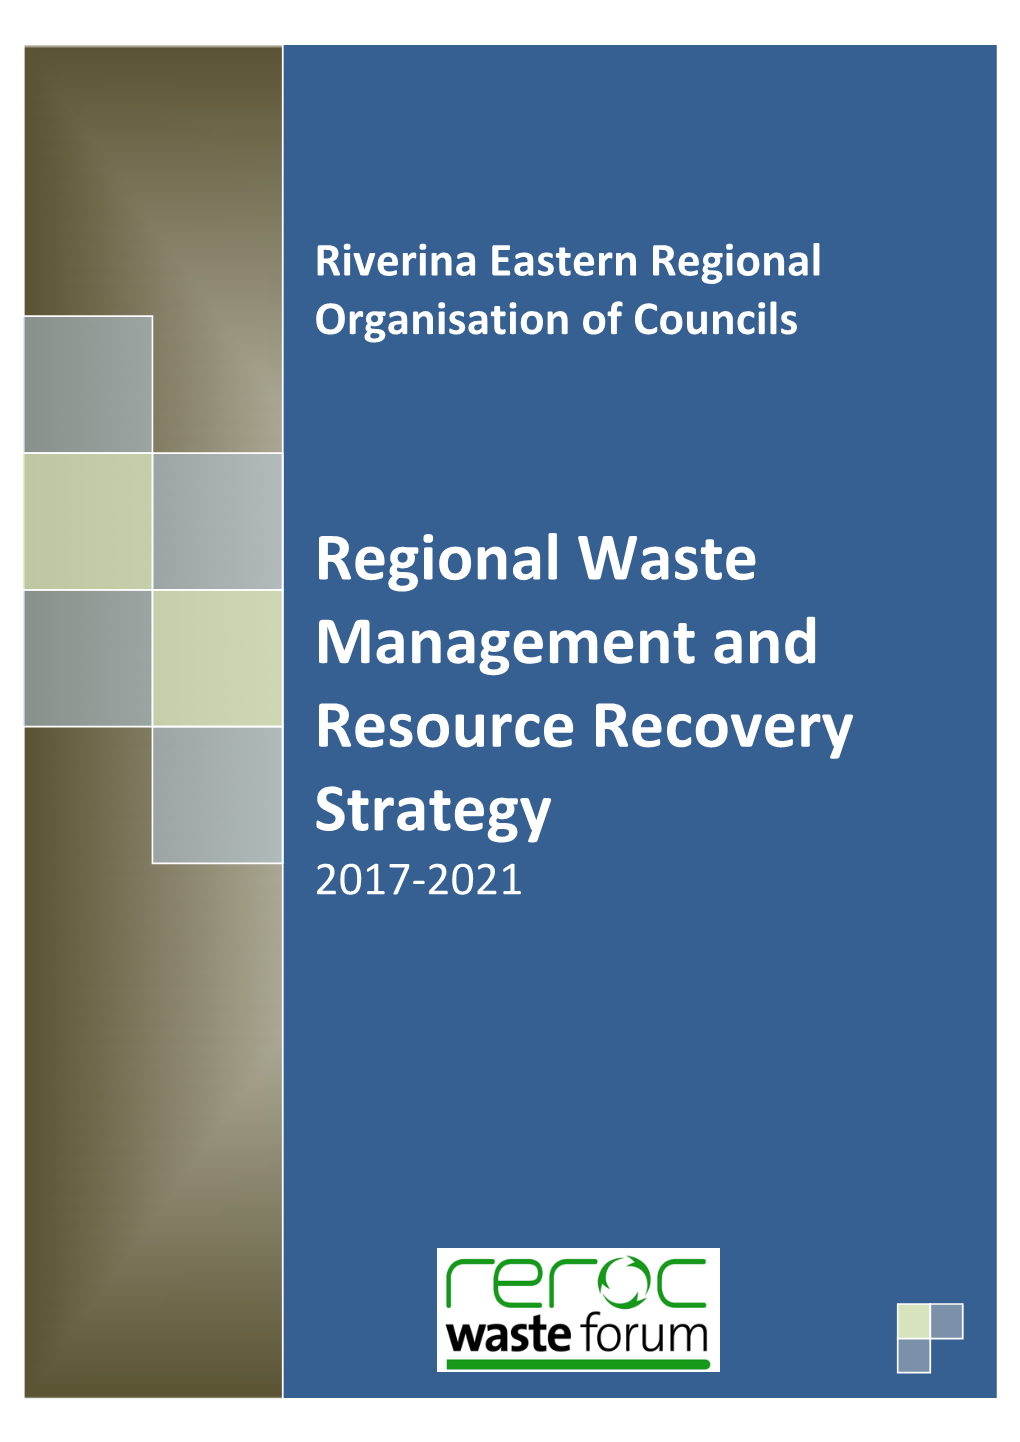 REROC Regional Waste Management and Resource Recovery Strategy